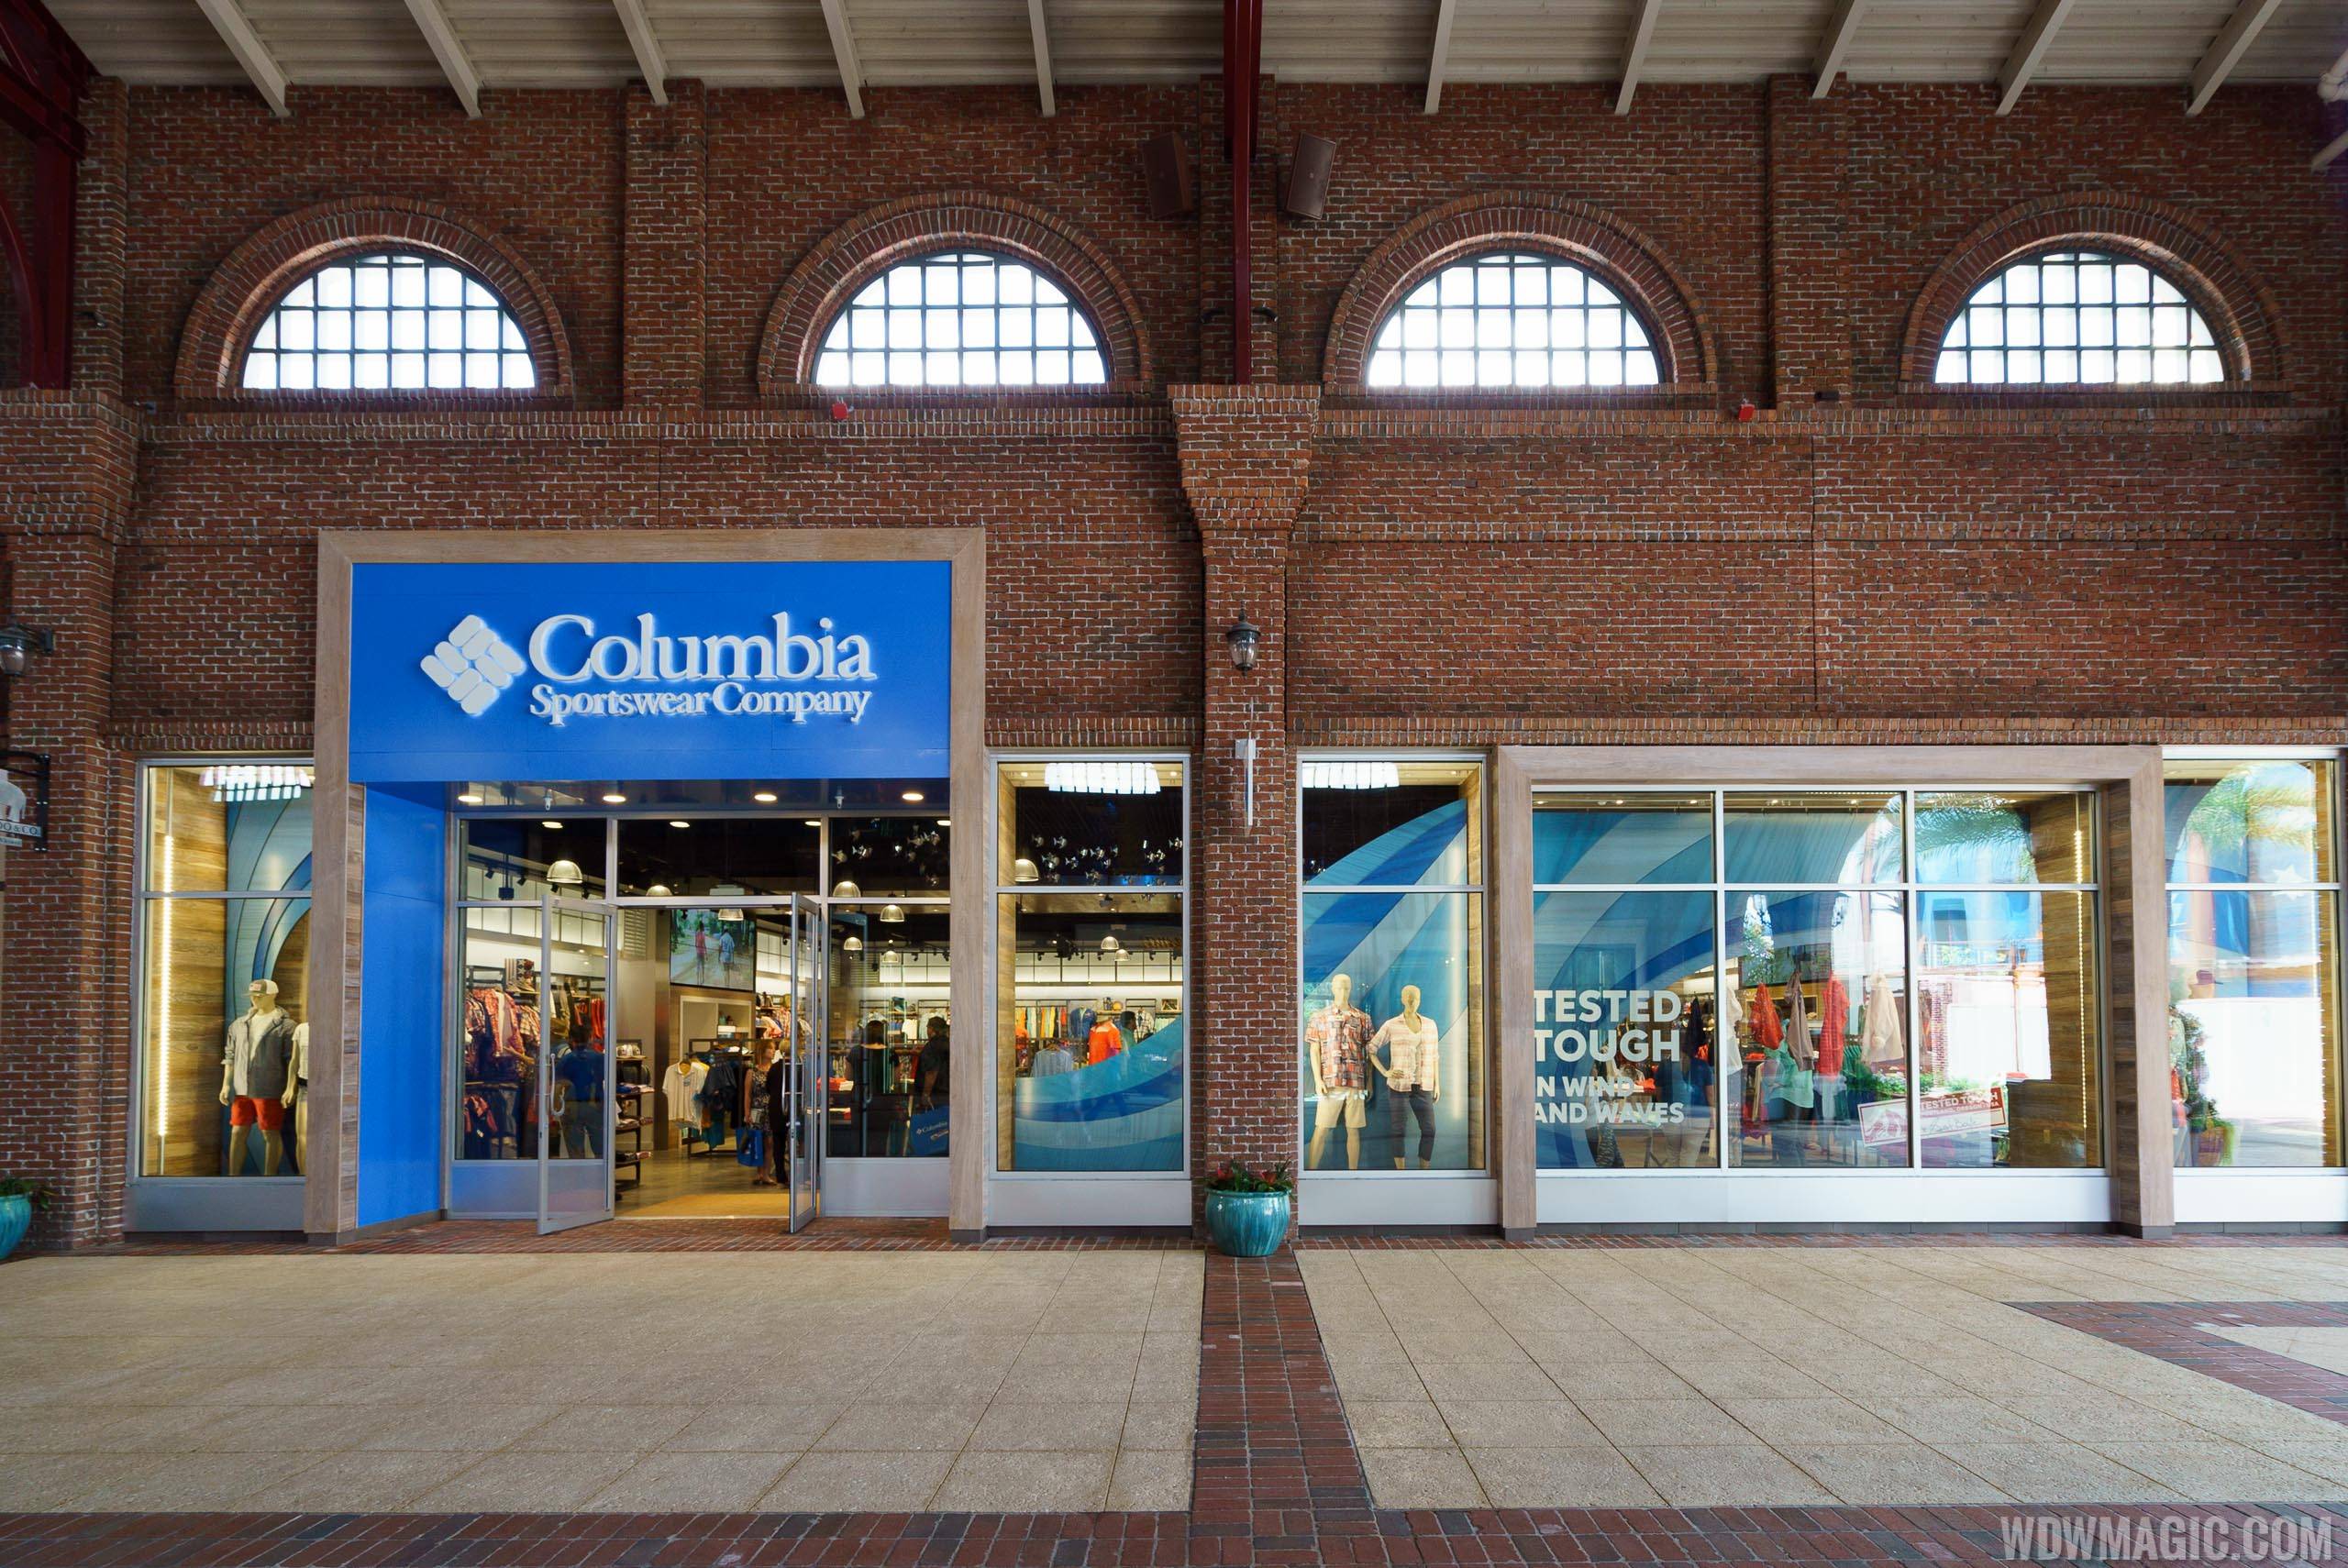 PHOTOS - Columbia Sportswear Company opens in the Town Center at Disney Springs